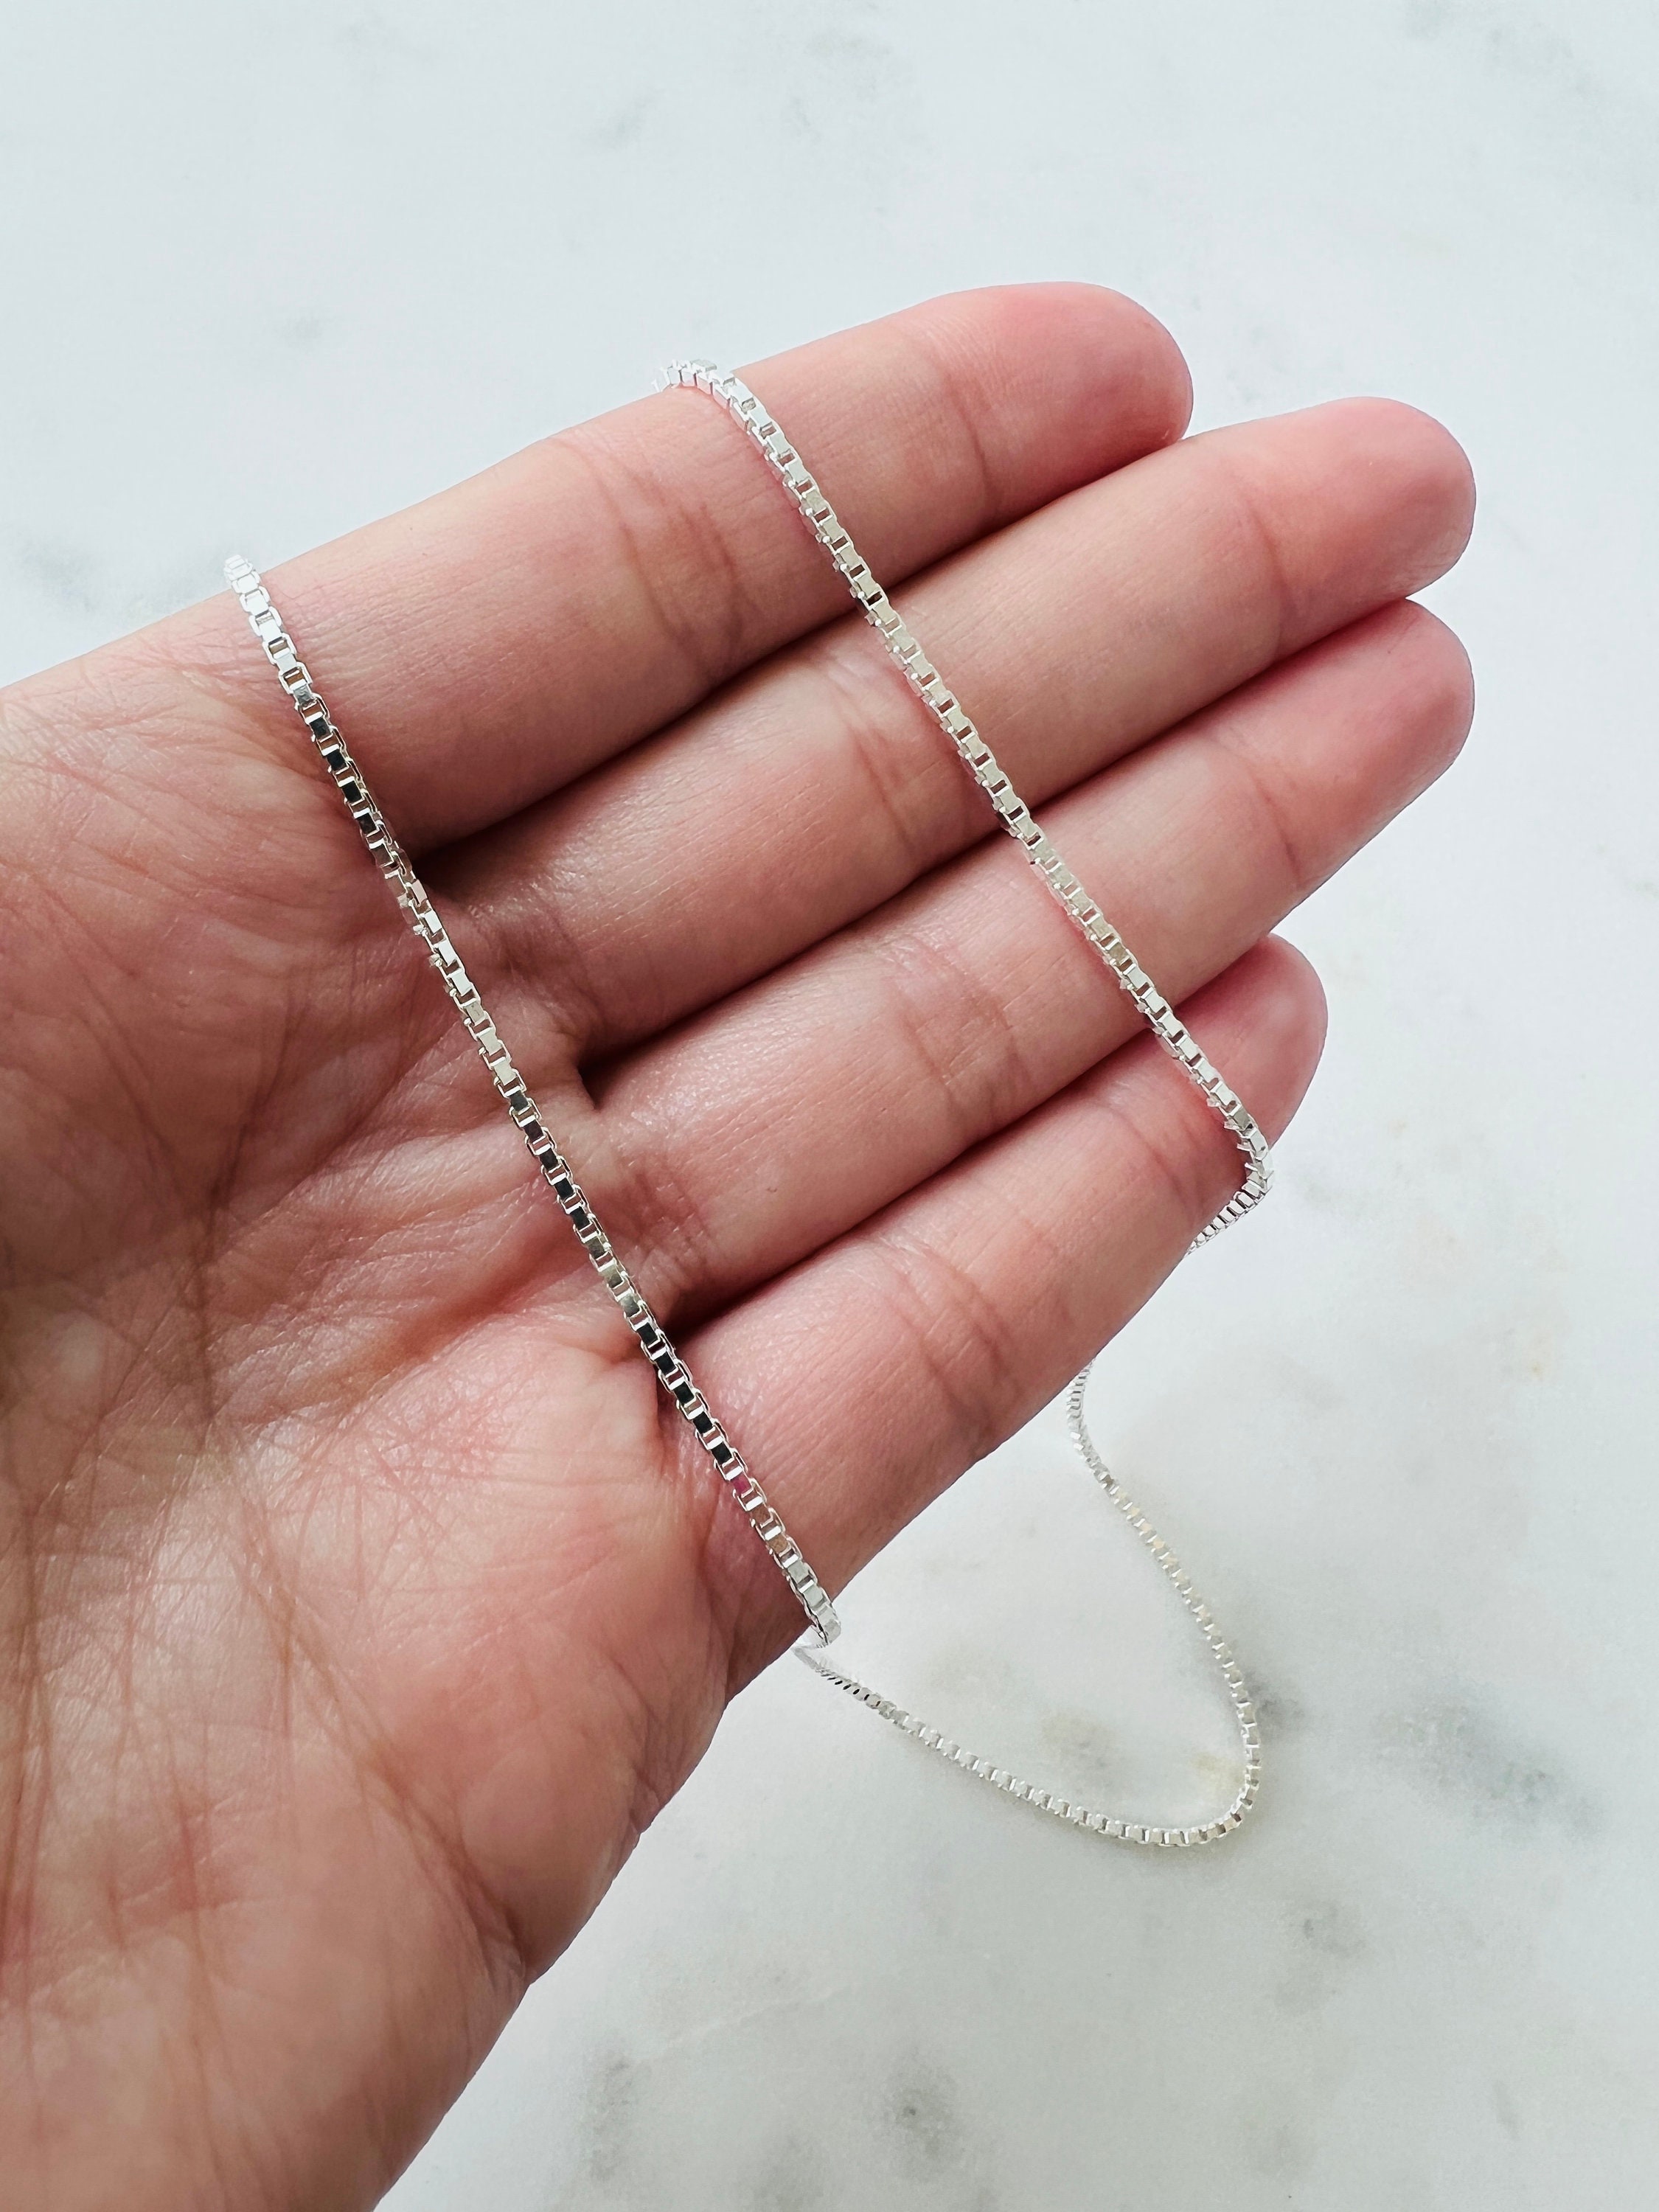 Silver 3mm Snake Chain Necklace, Man Chain Necklace, Thin Silver Necklace for Men, Minimalist Chain, Silver Chain Mens Jewelry, Mens Chain